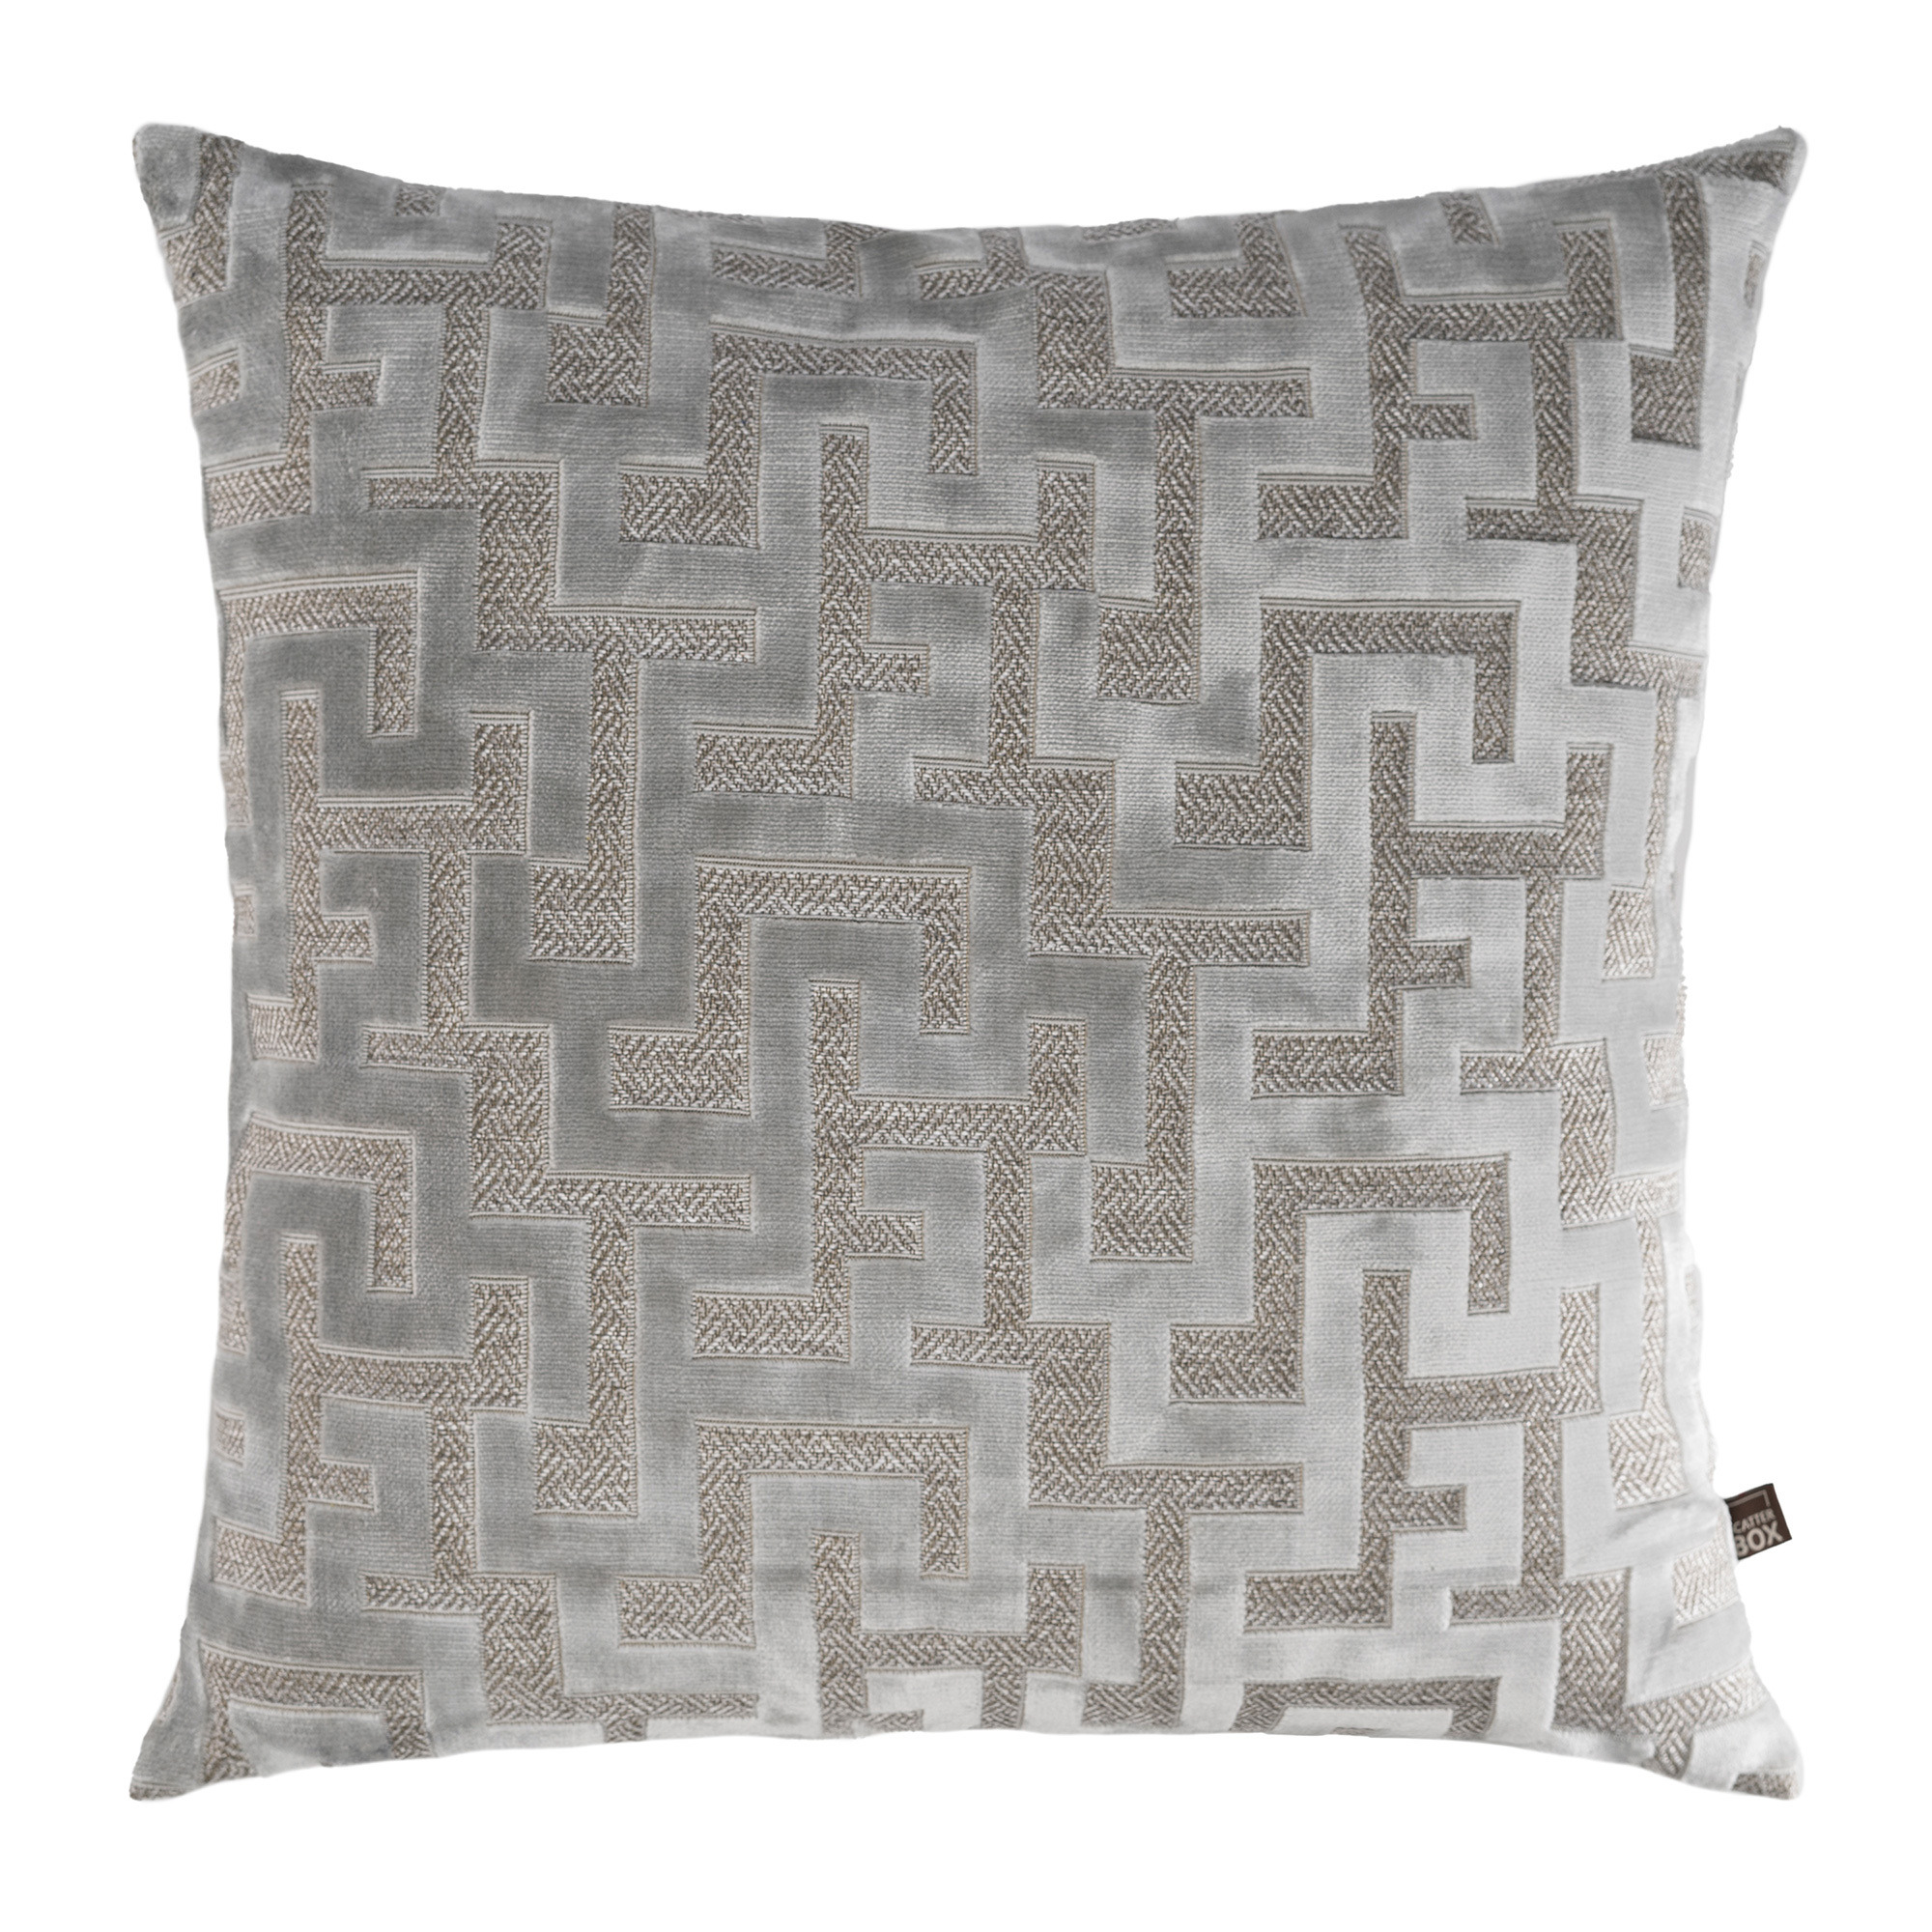 Silver Haute Cushion, Square Polyester - Barker & Stonehouse - image 1